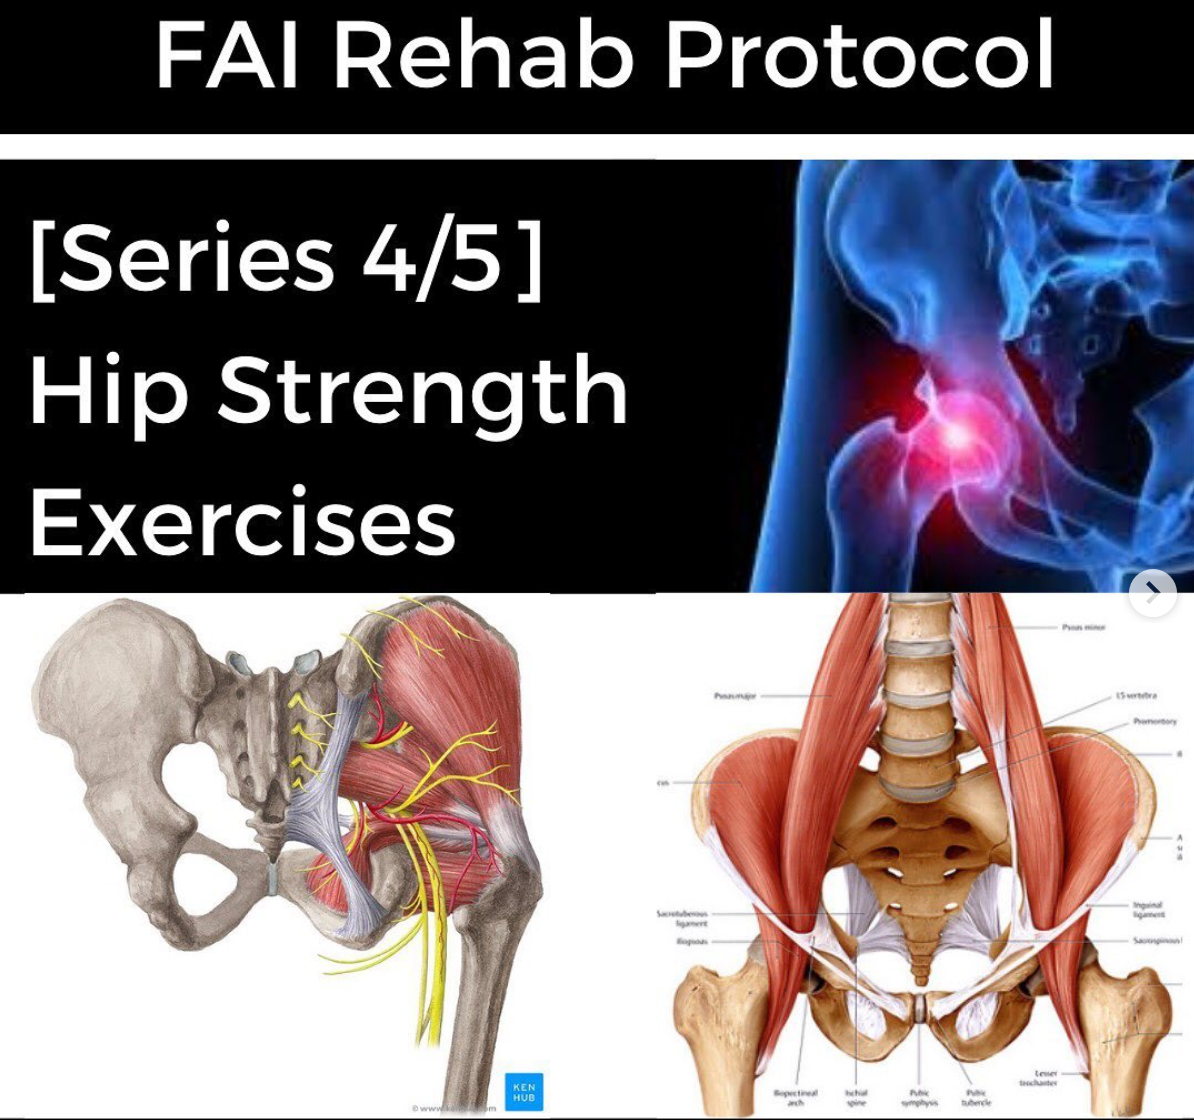 Exercises For Tight Hips - [P]rehab